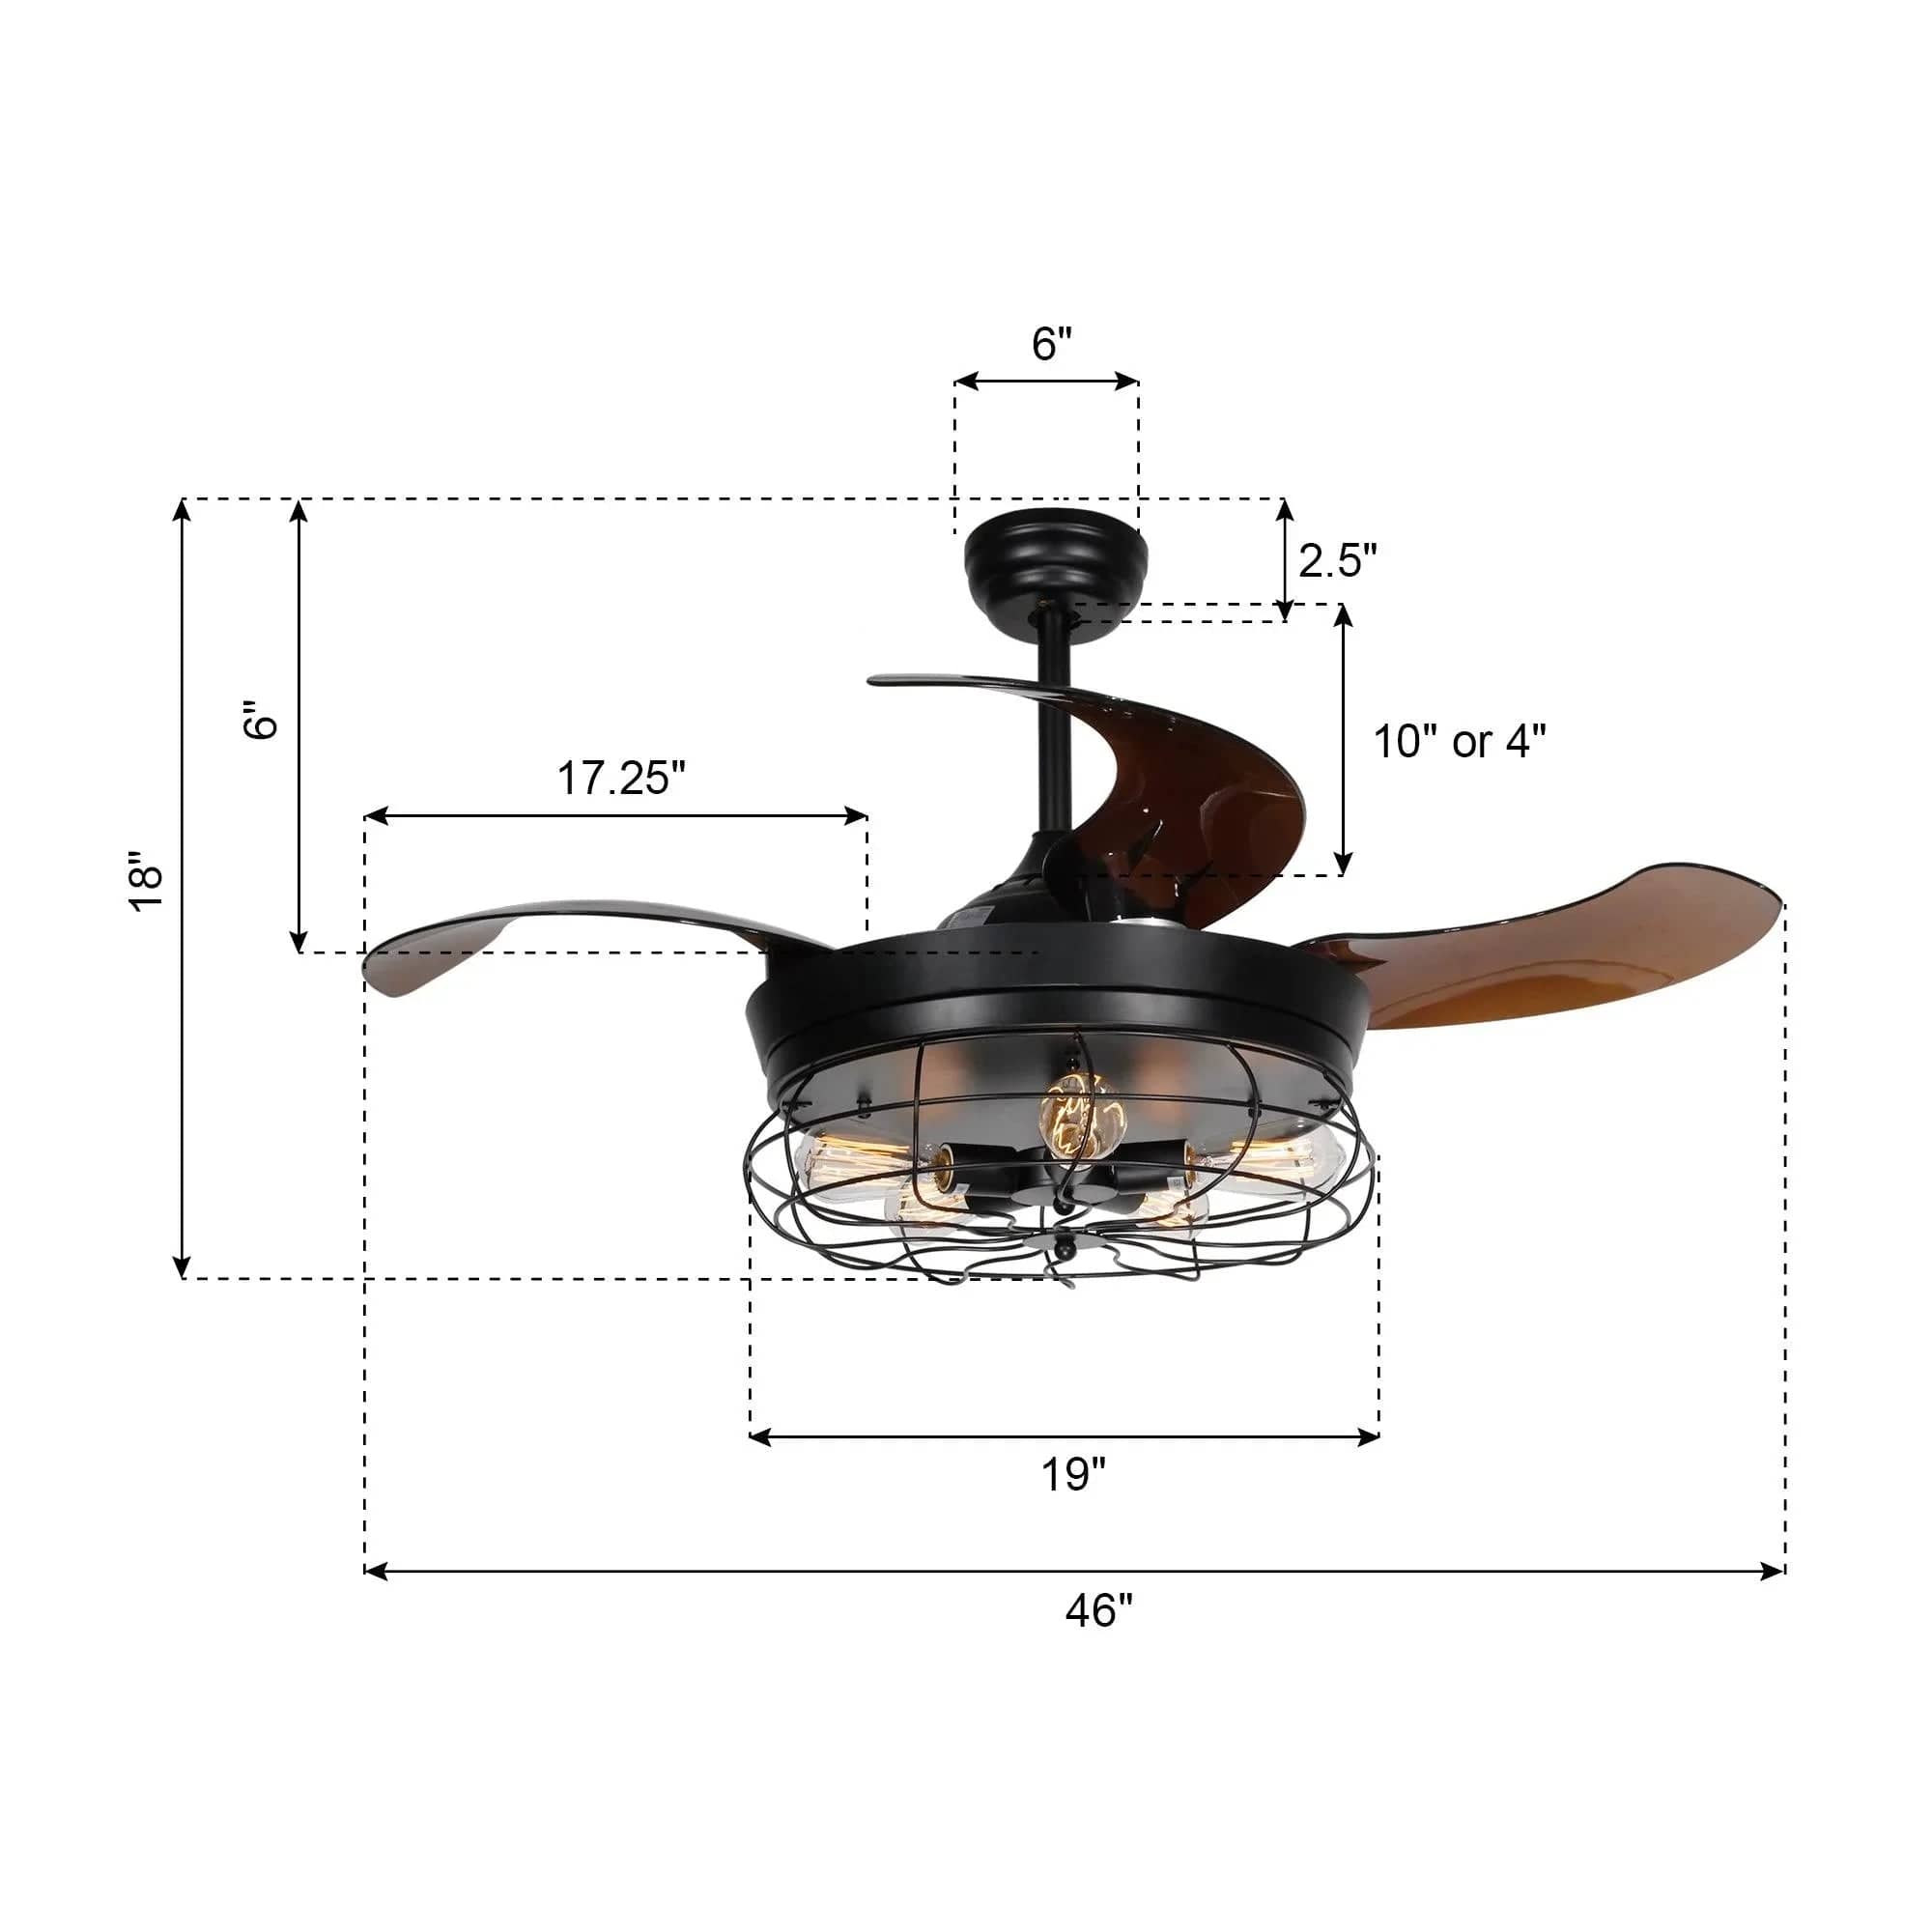 Parrot Uncle Parrot Uncle 46 In. Benally Industrial Ceiling Fan with Lighting and Remote Control Ceiling Fan F4503AGQ110V